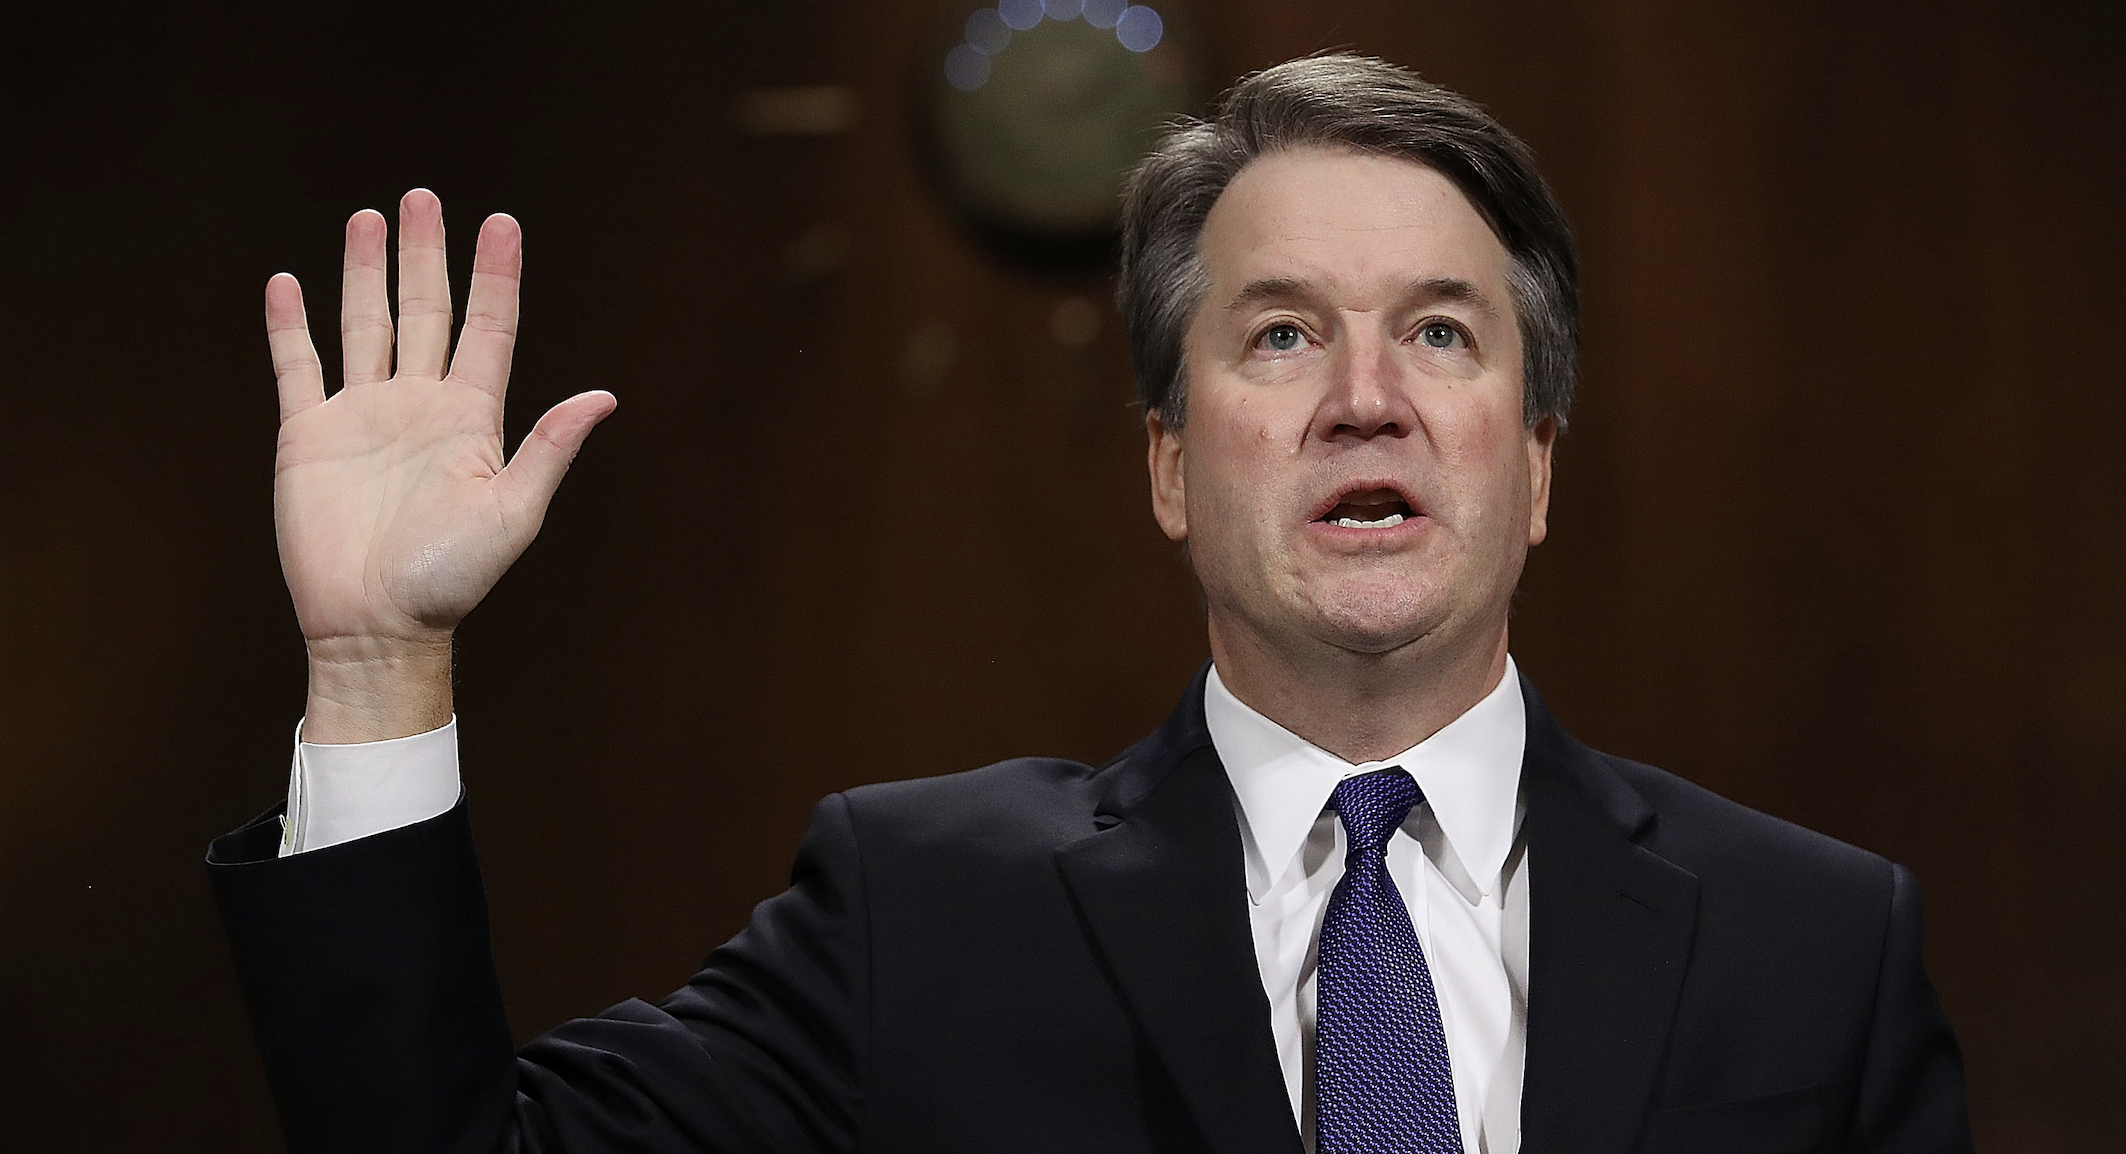 Police Arrest Armed Man Near Brett Kavanaughs Home Who Allegedly Wanted To Kill The Justice